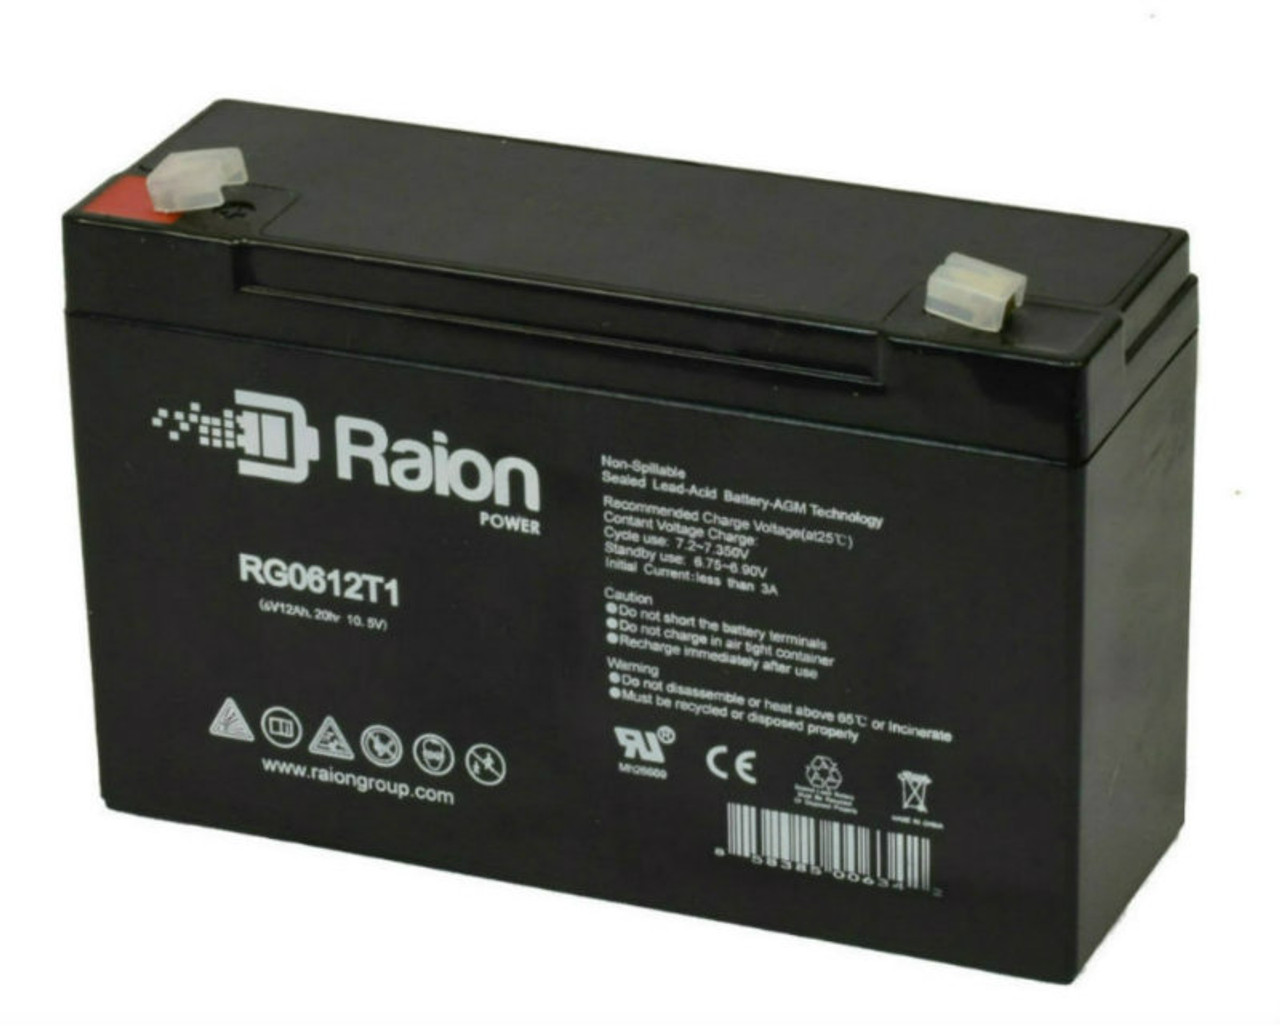 Raion Power RG06120T1 Replacement 6V 12Ah Emergency Light Battery for Chloride TMFRE150